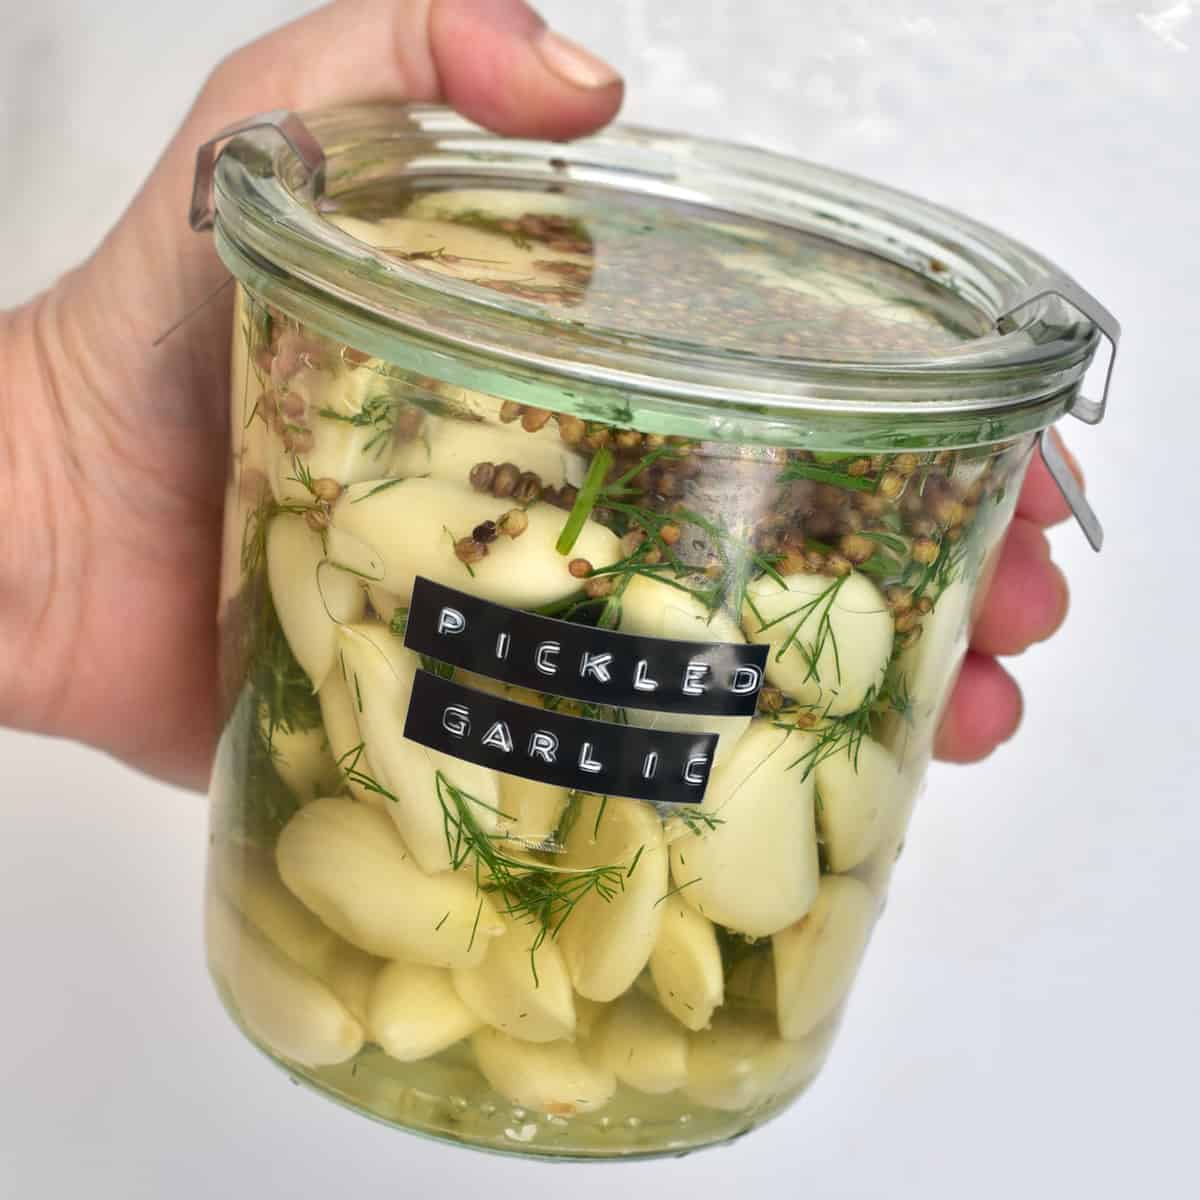 A jar with homemade pickled garlic